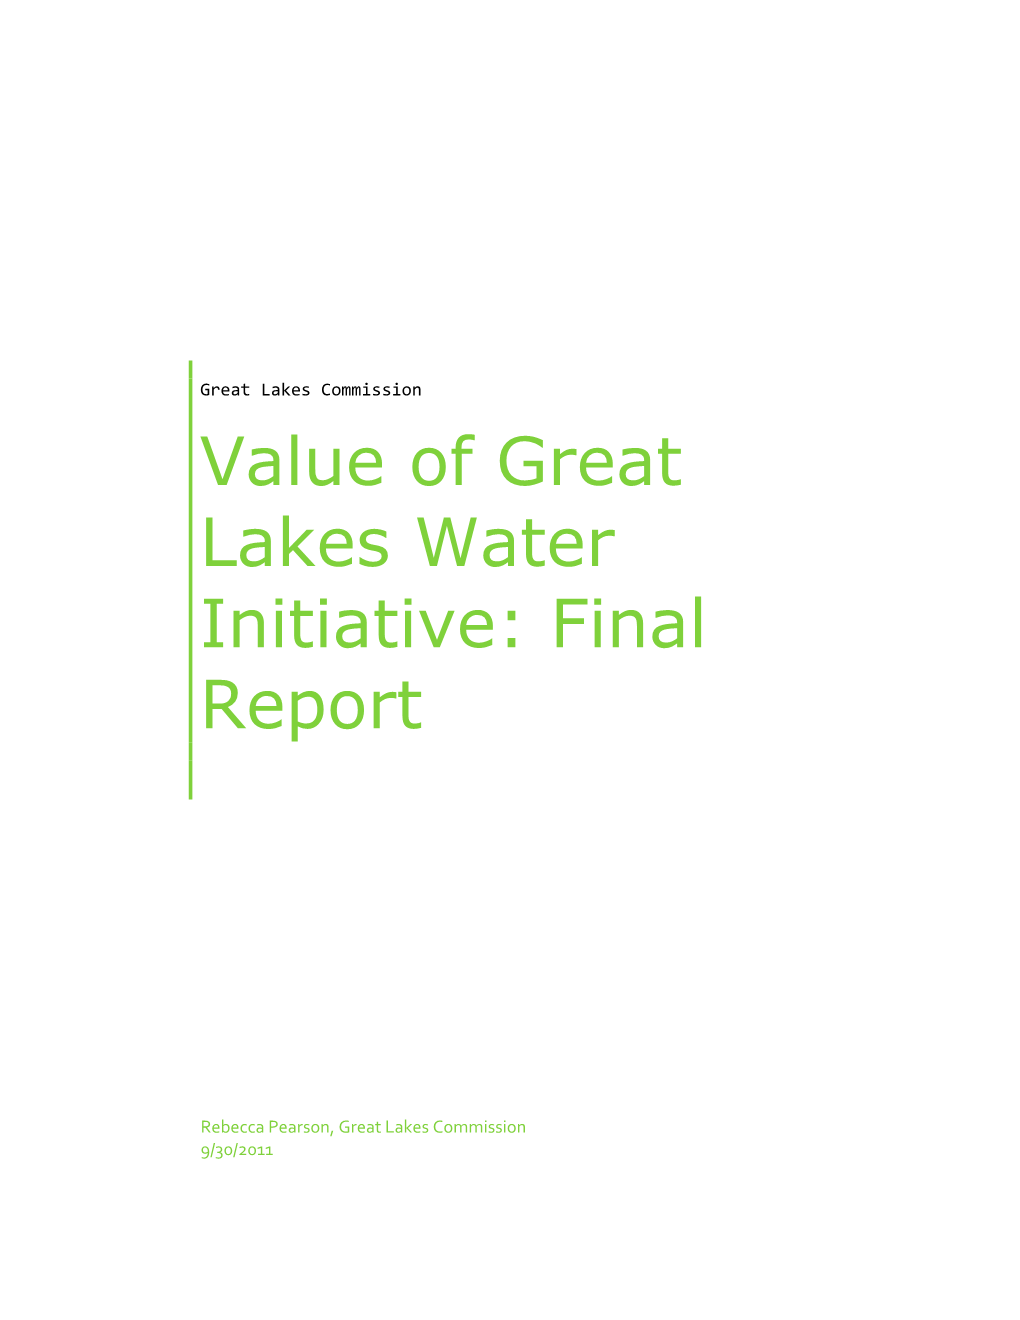 Value of Great Lakes Water Initiative: Final Report